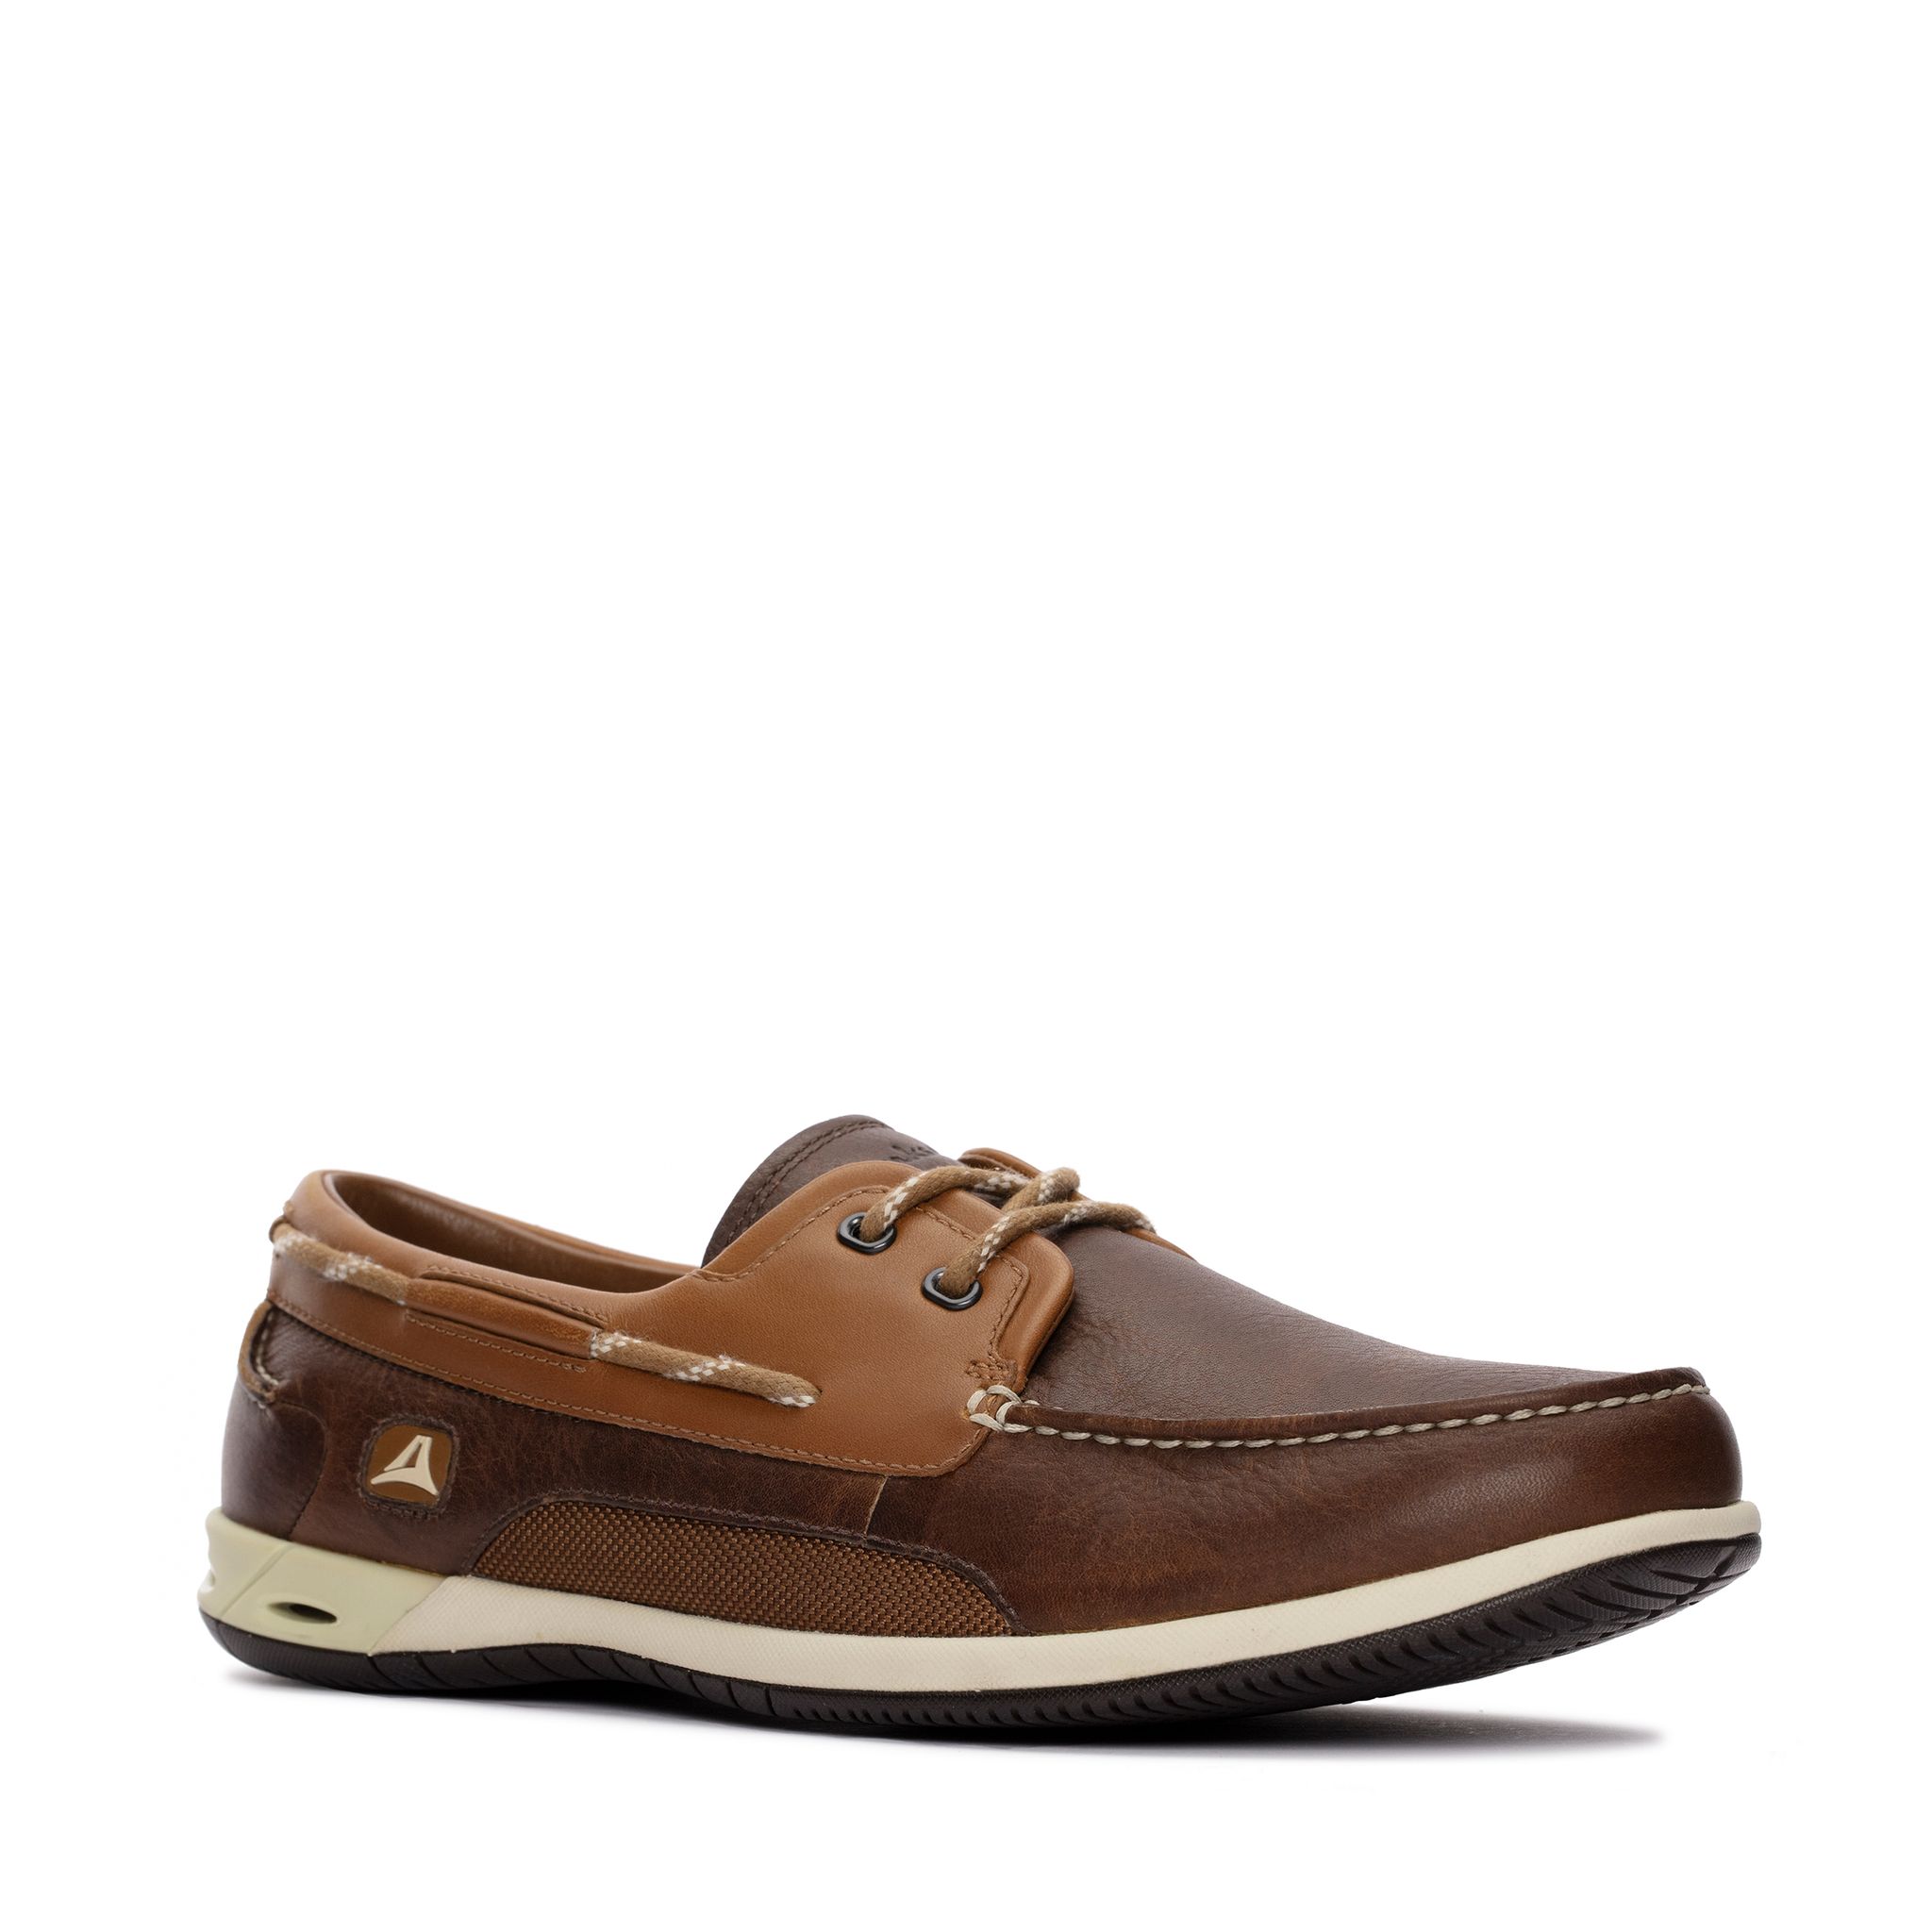 Clarks Orson Harbour - Brown smooth leather